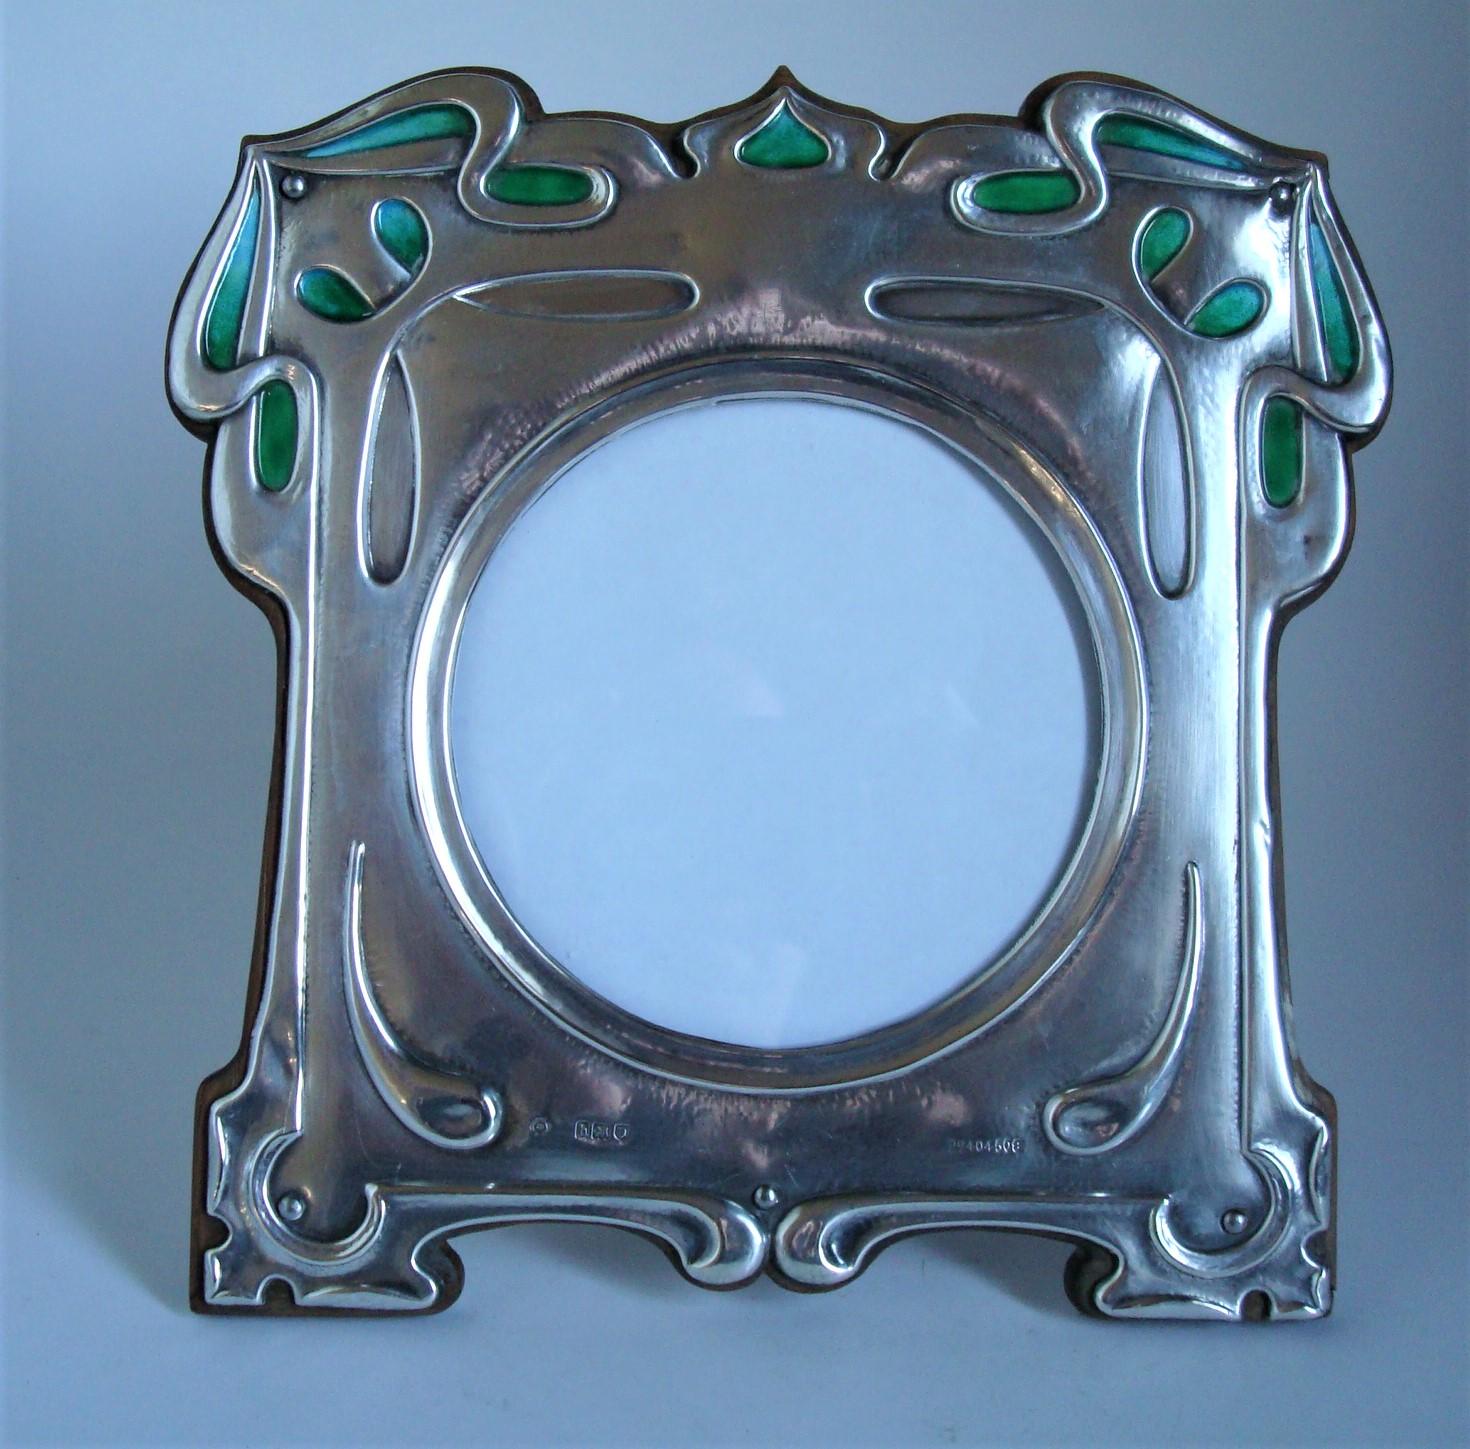 Art Nouveau - Art & craft sterling silver enamel photograph frame - William Hutton & Sons 1903.
William Hutton & Sons silver and enamel square photo frame, the design attributed to Kate Allen.

The frame is in very good condition with original